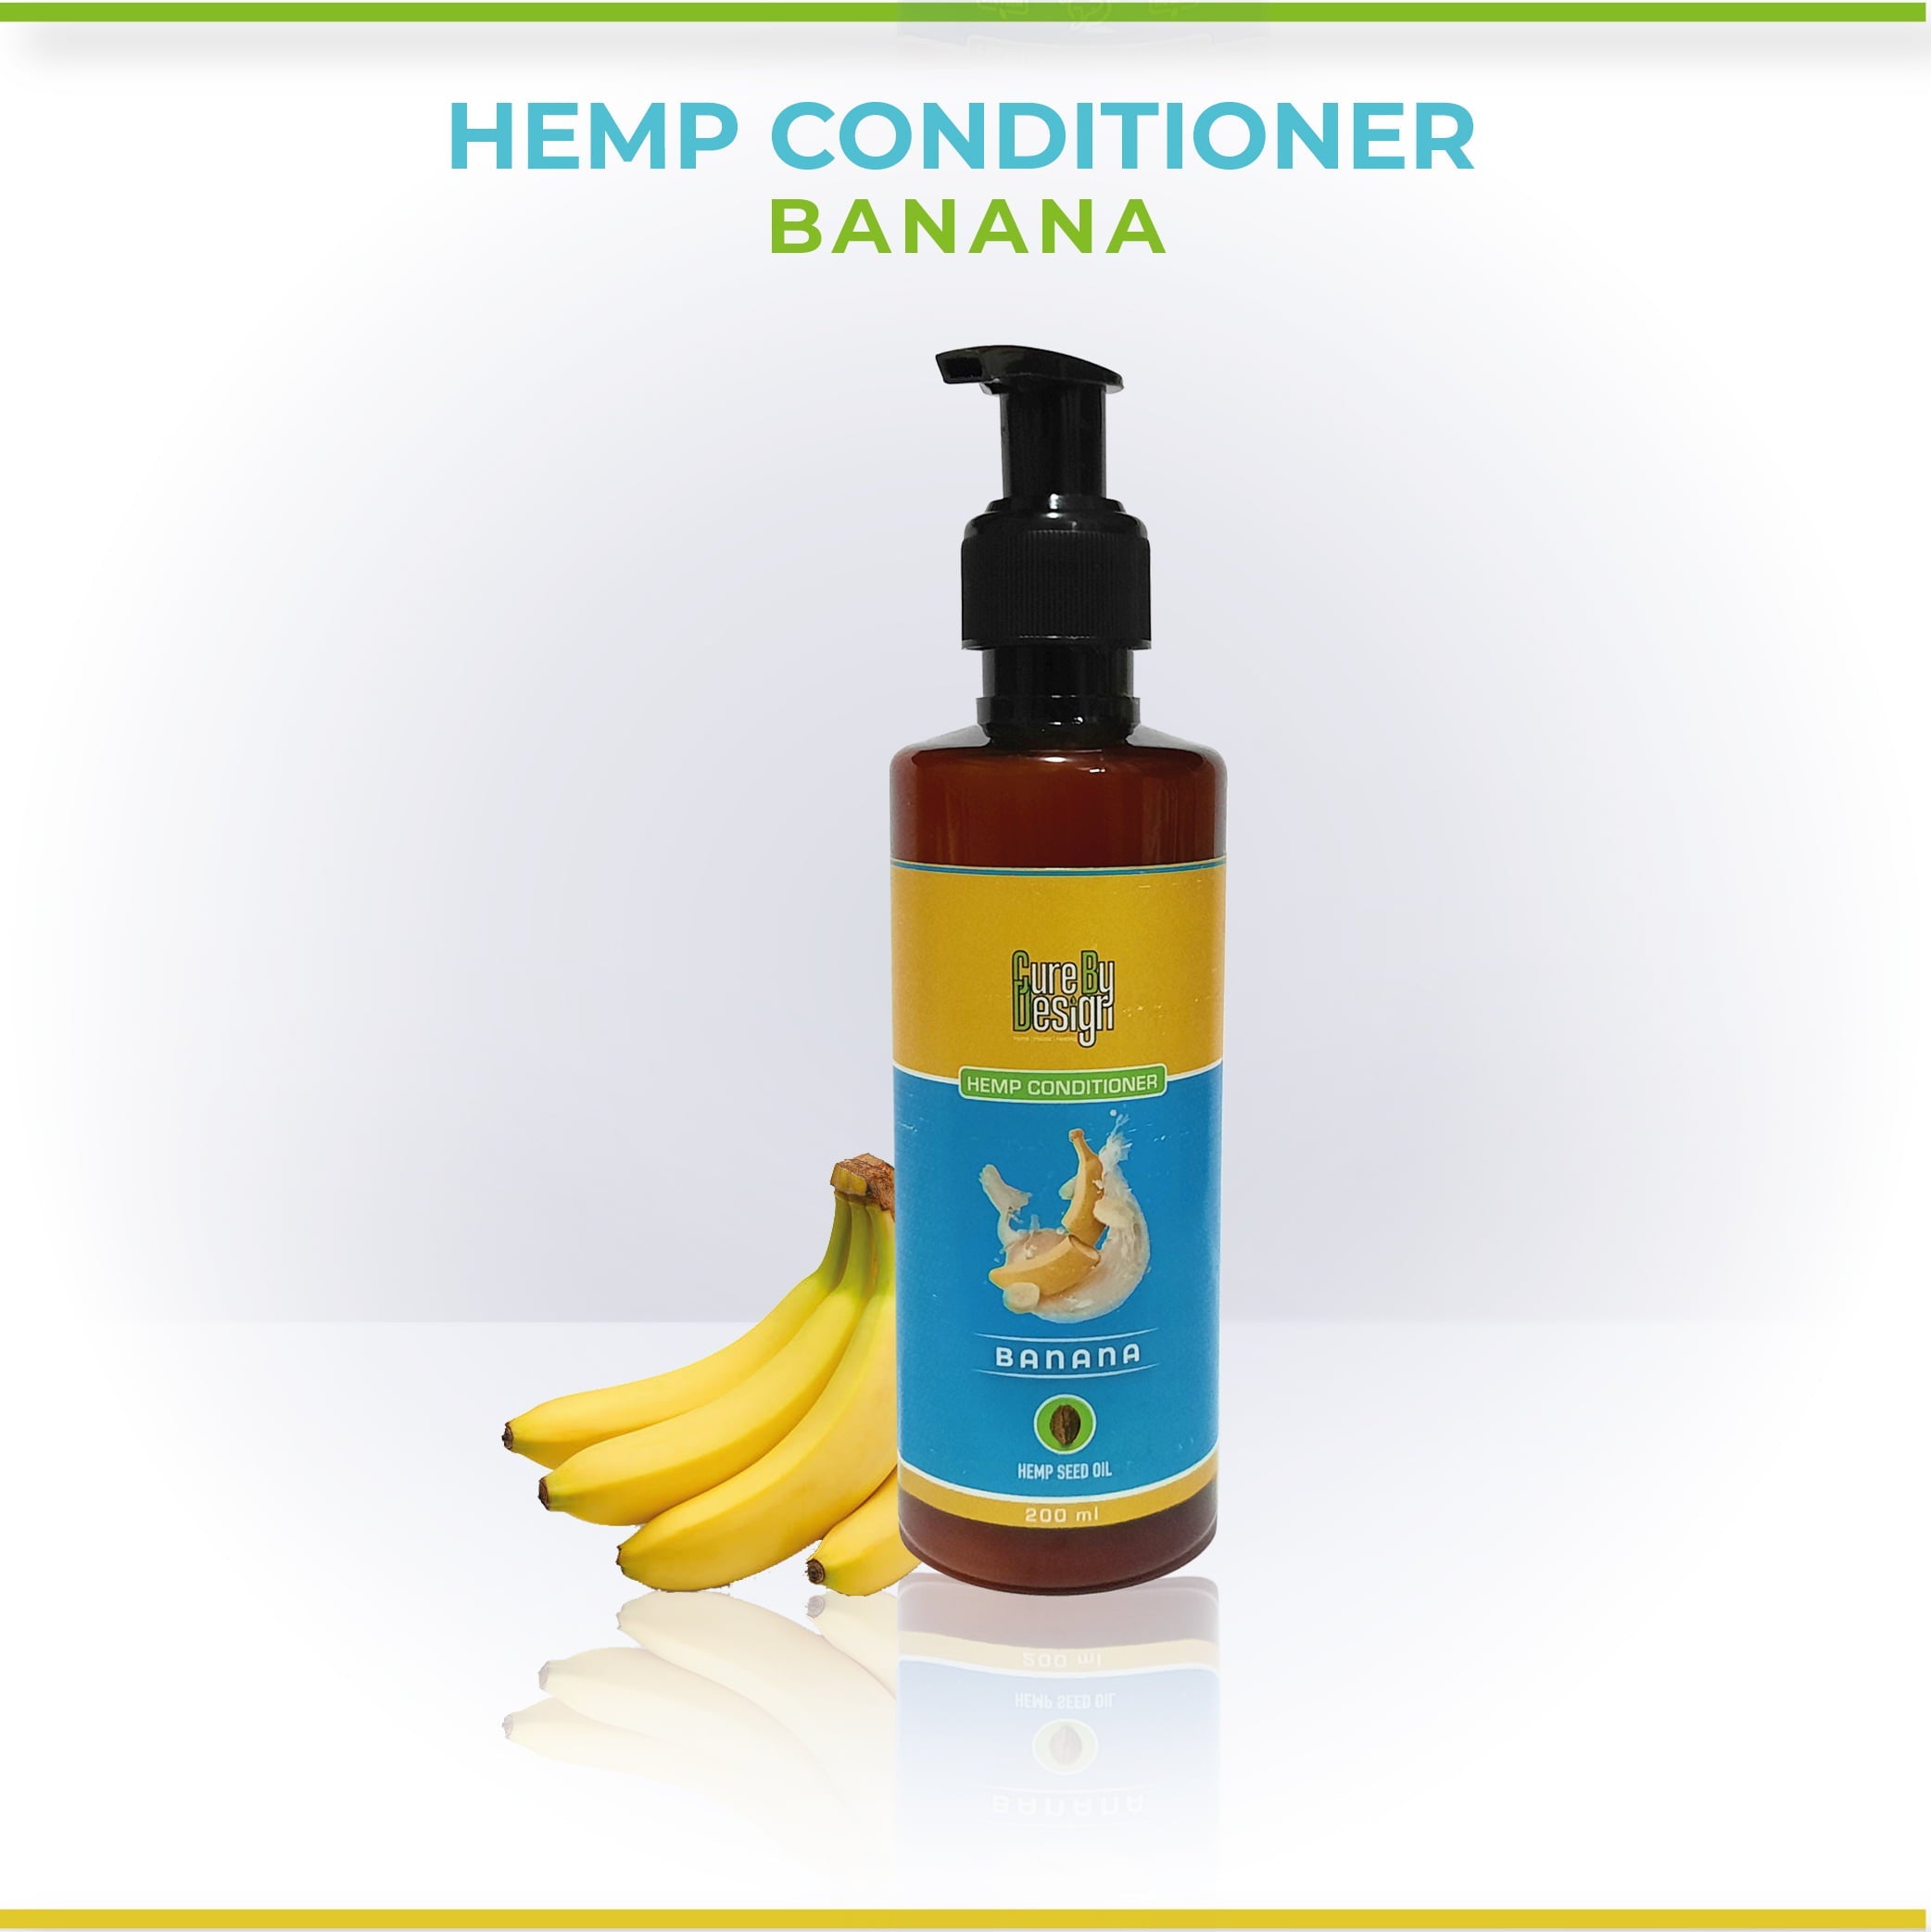 Cure By Design Hemp & Banana Conditioner - Our Better Planet